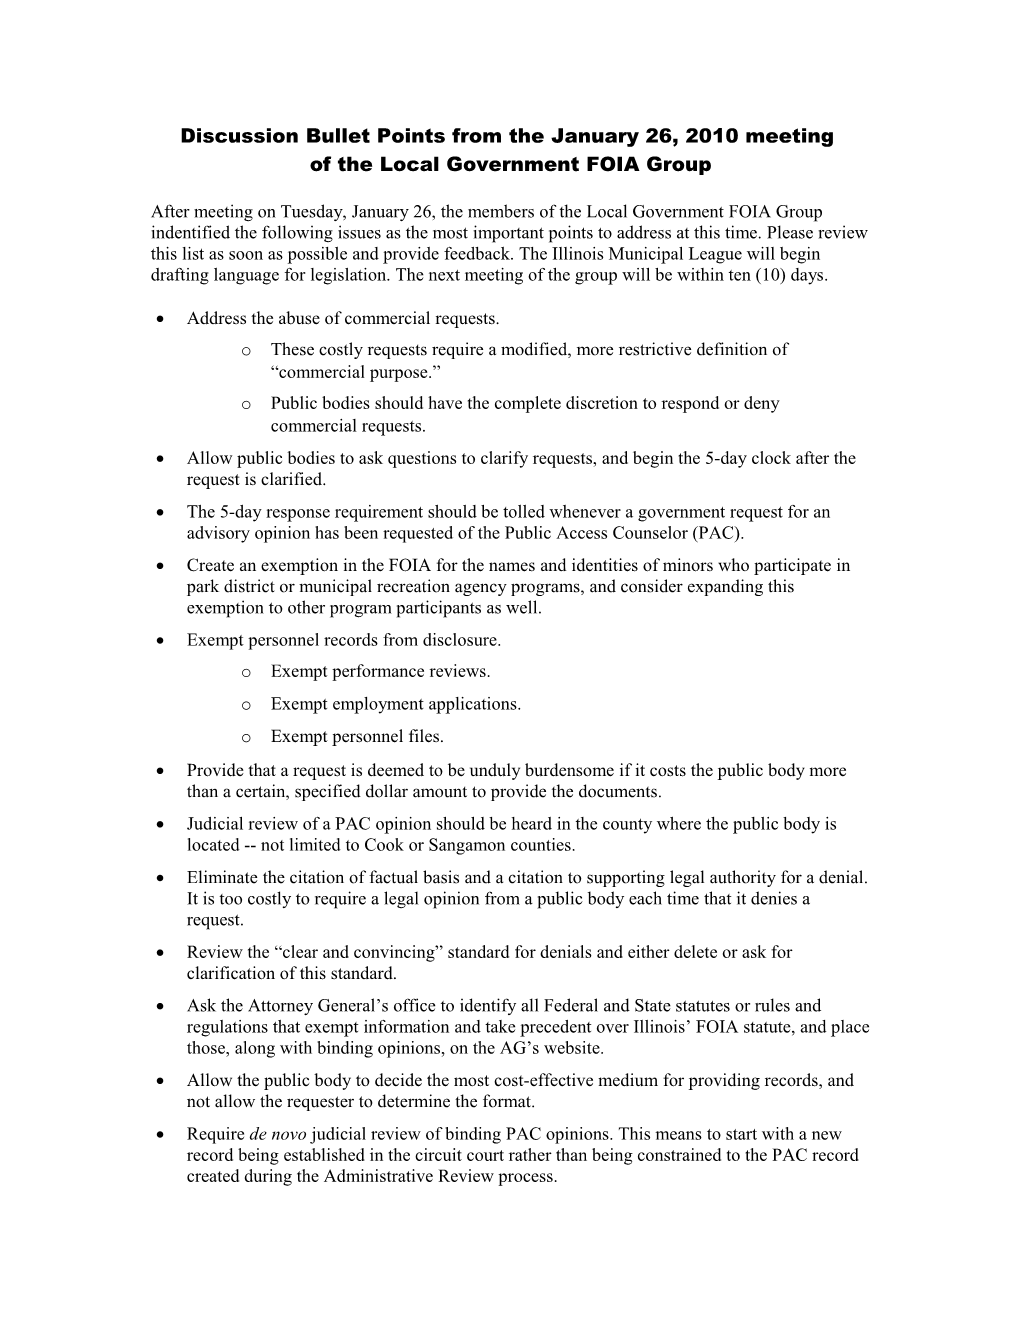 Discussion Bullet Points from the January 26, 2010 Meeting